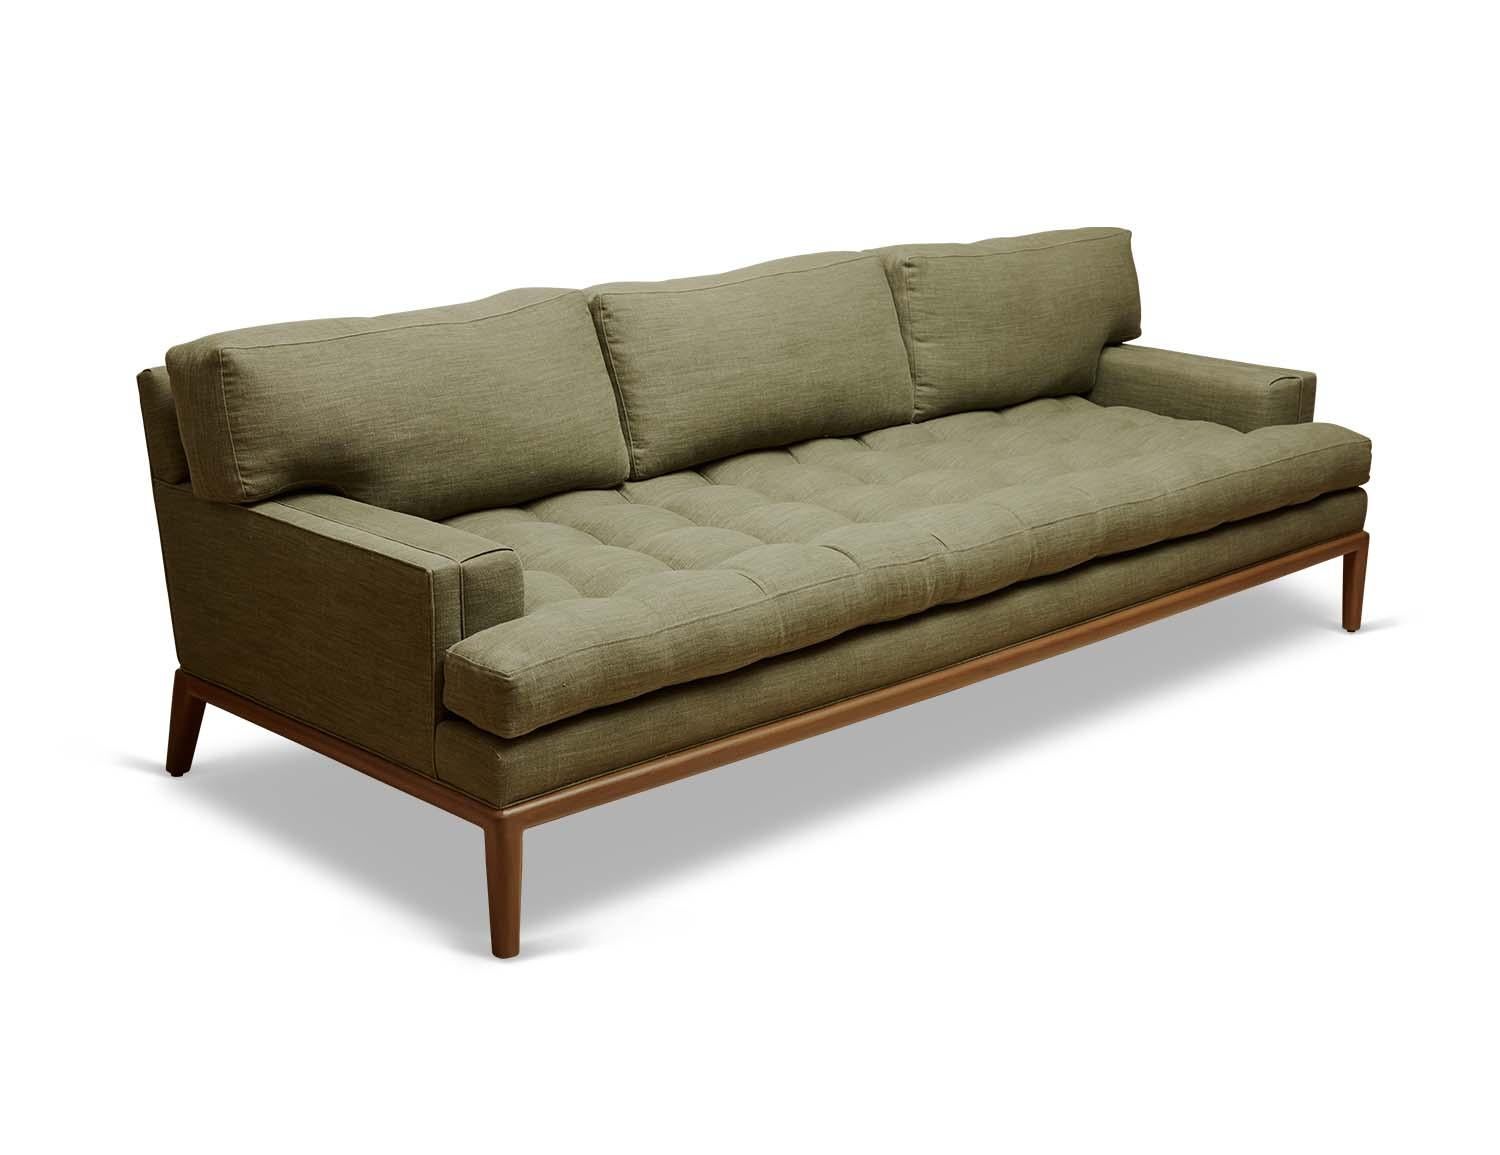 The Forster sofa is a midcentury inspired sofa with a loose tufted seat, loose back cushions, and piped details. The sofa rests atop a simple, rounded wood base.

 The Lawson-Fenning collection is designed and handmade in Los Angeles, California.